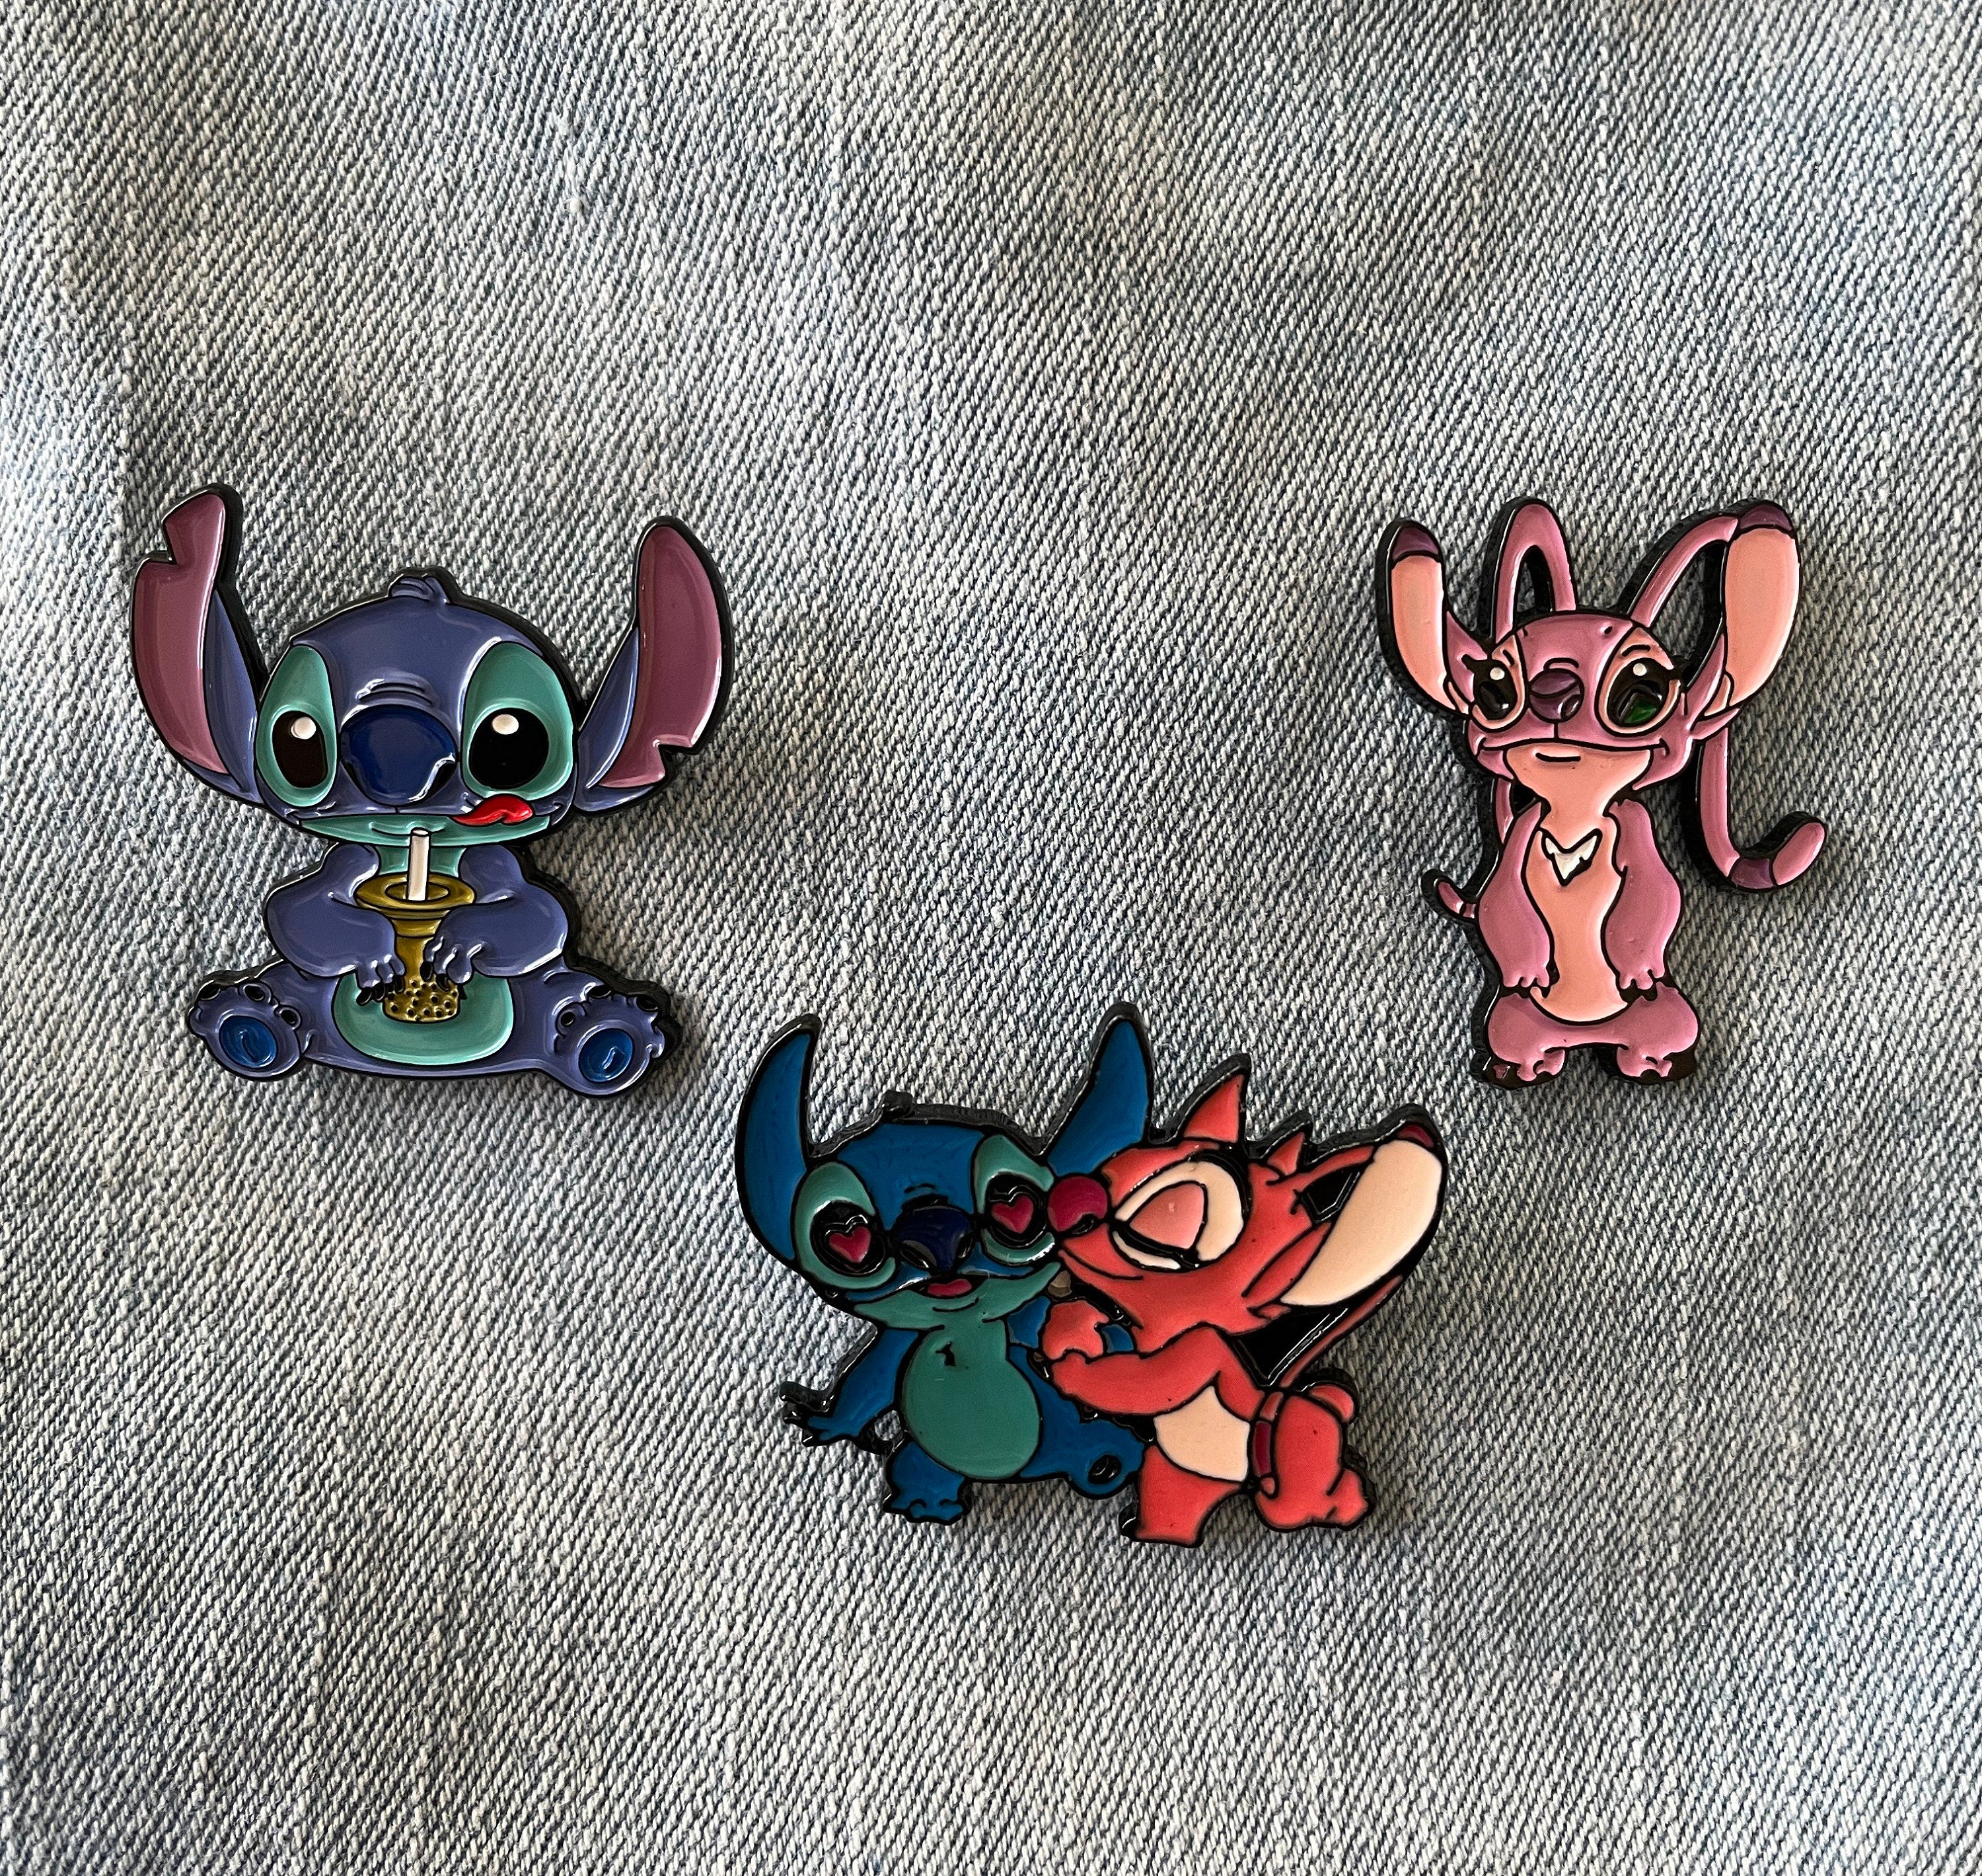 Disney Trading Pin Angel & Stitch Puzzle Pieces